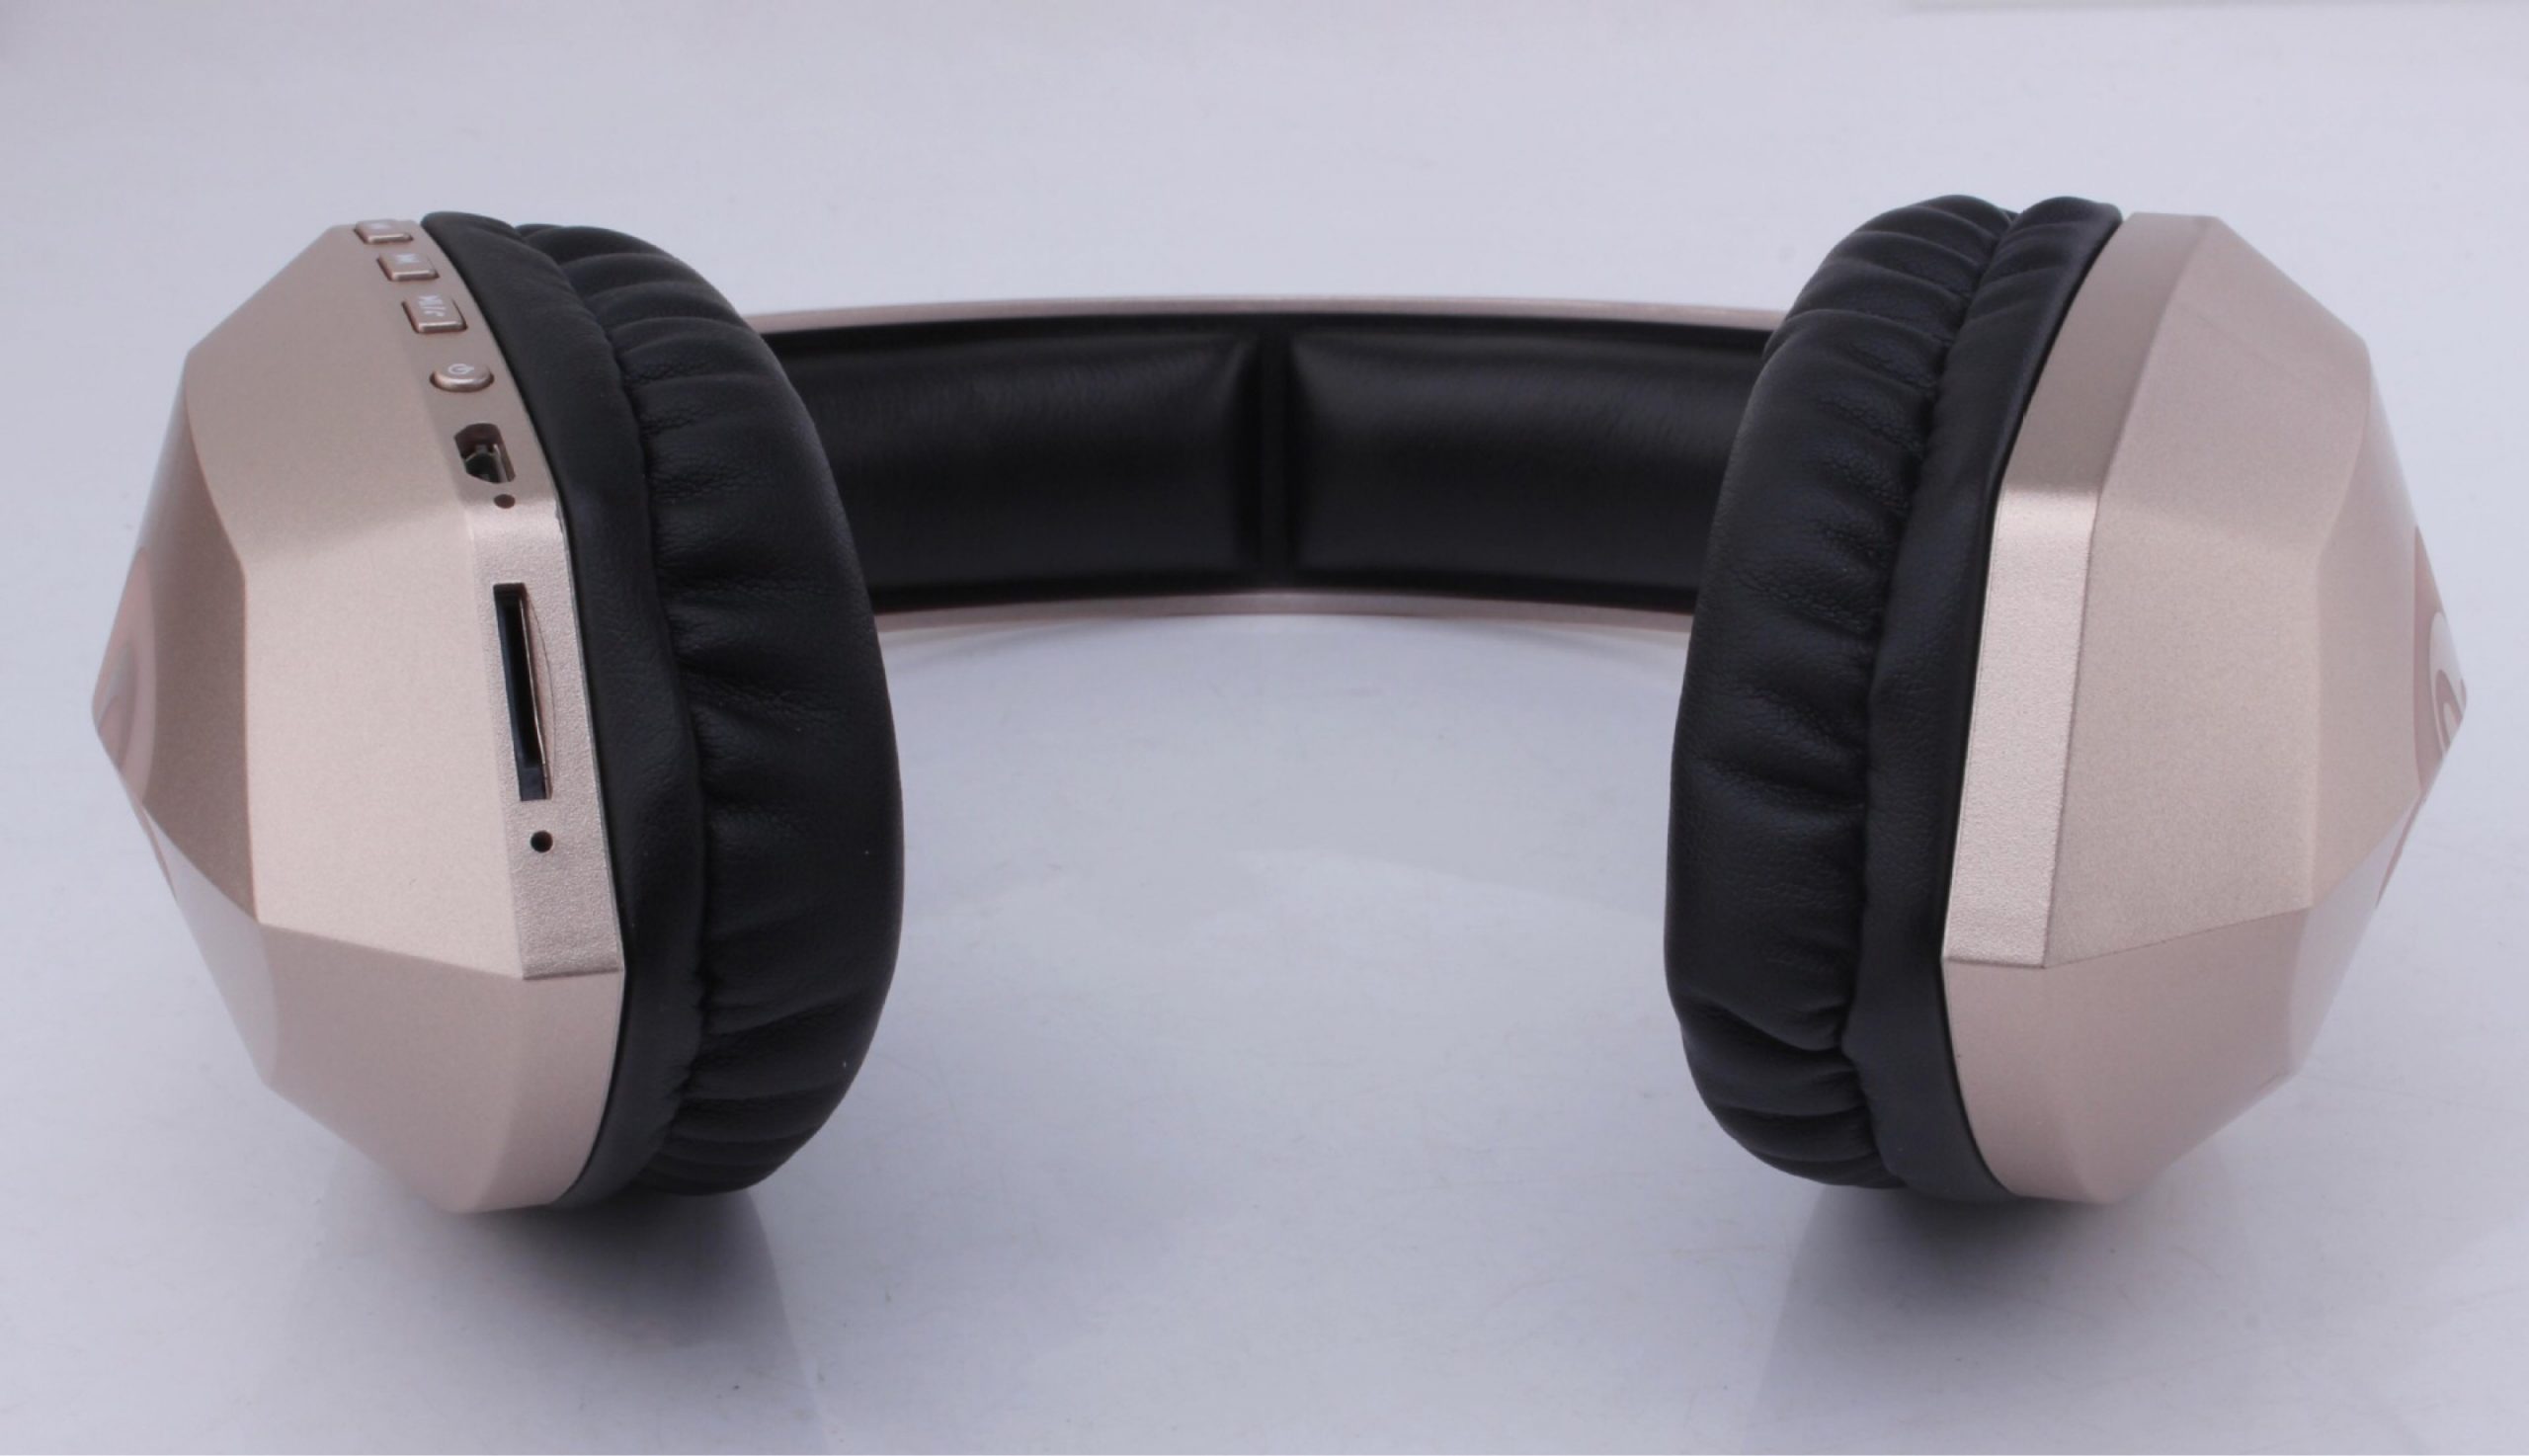 OVLENG S33 Over Ear Bass Stereo Bluetooth Headphone Wireless Headset Support Micro SD/TF Card FM Radio Microphone & LED